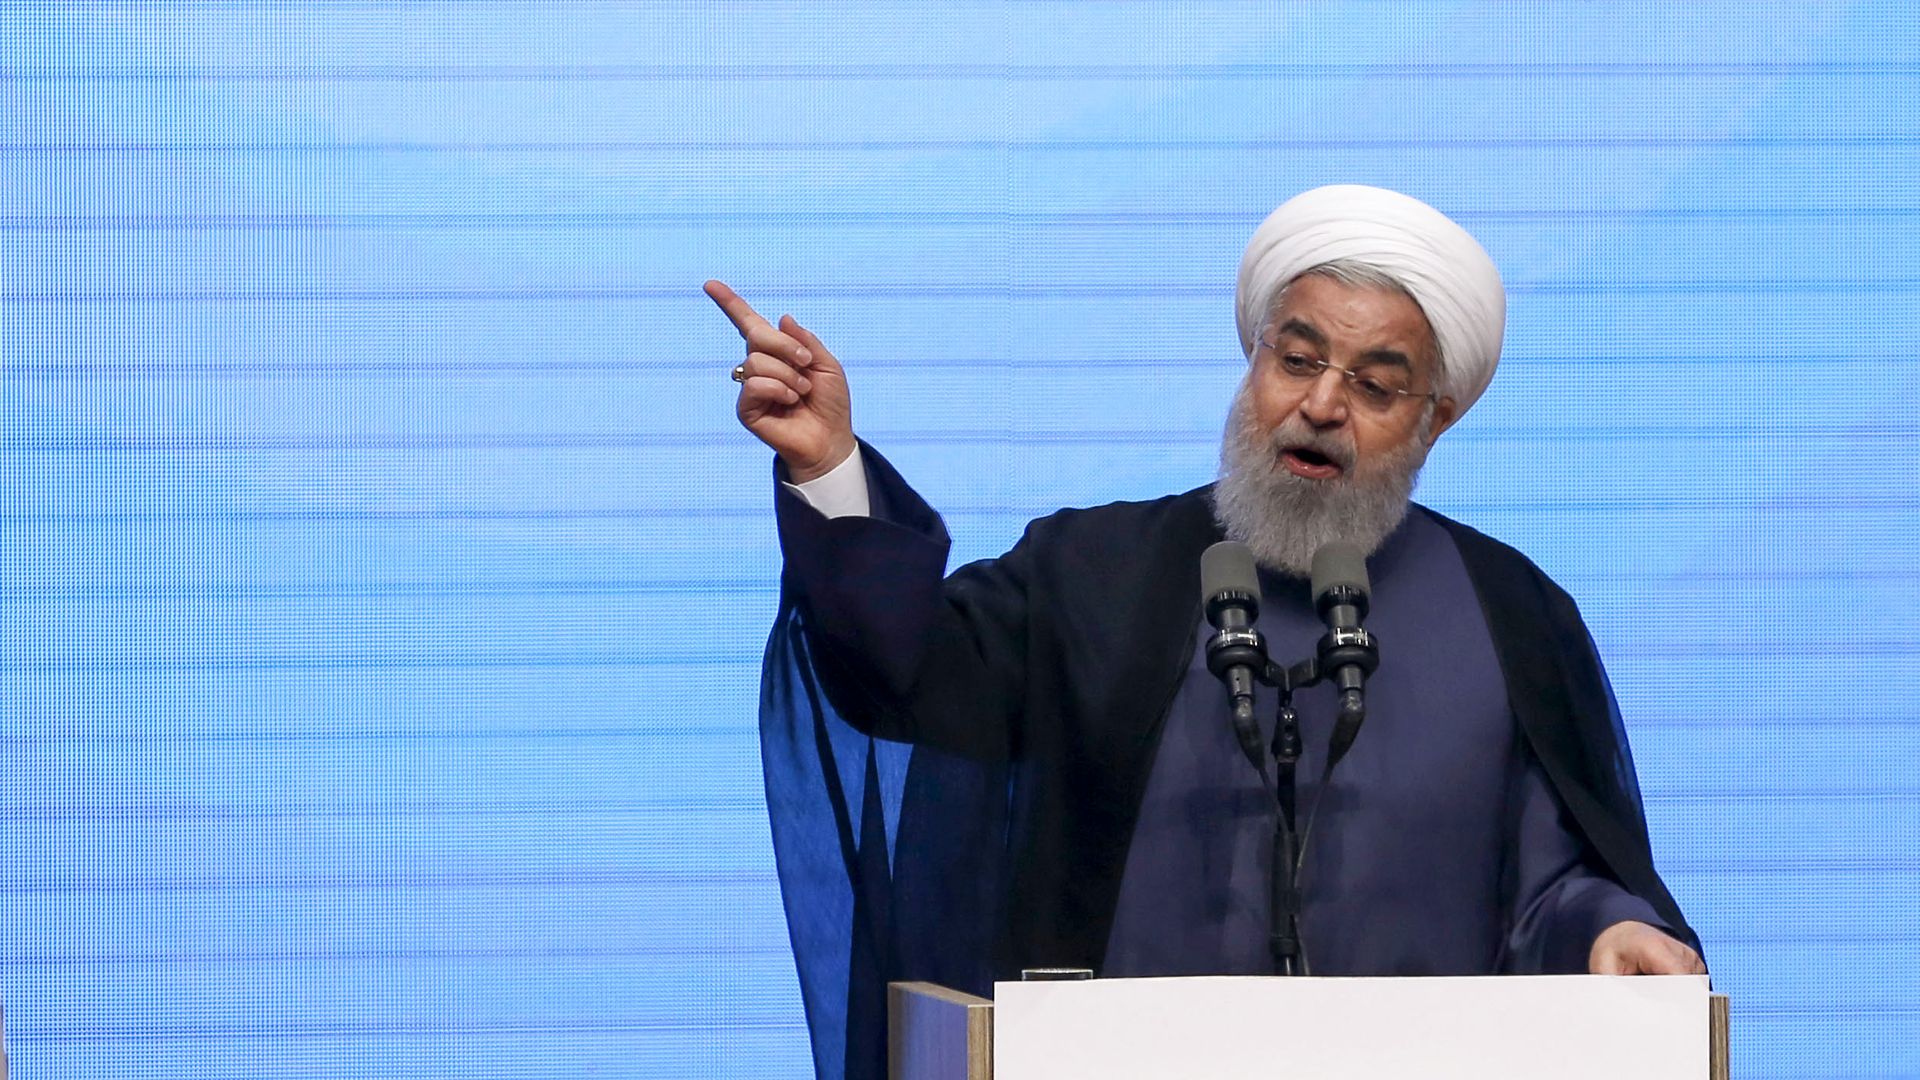 Rouhani gestures and speaks from behind a podium